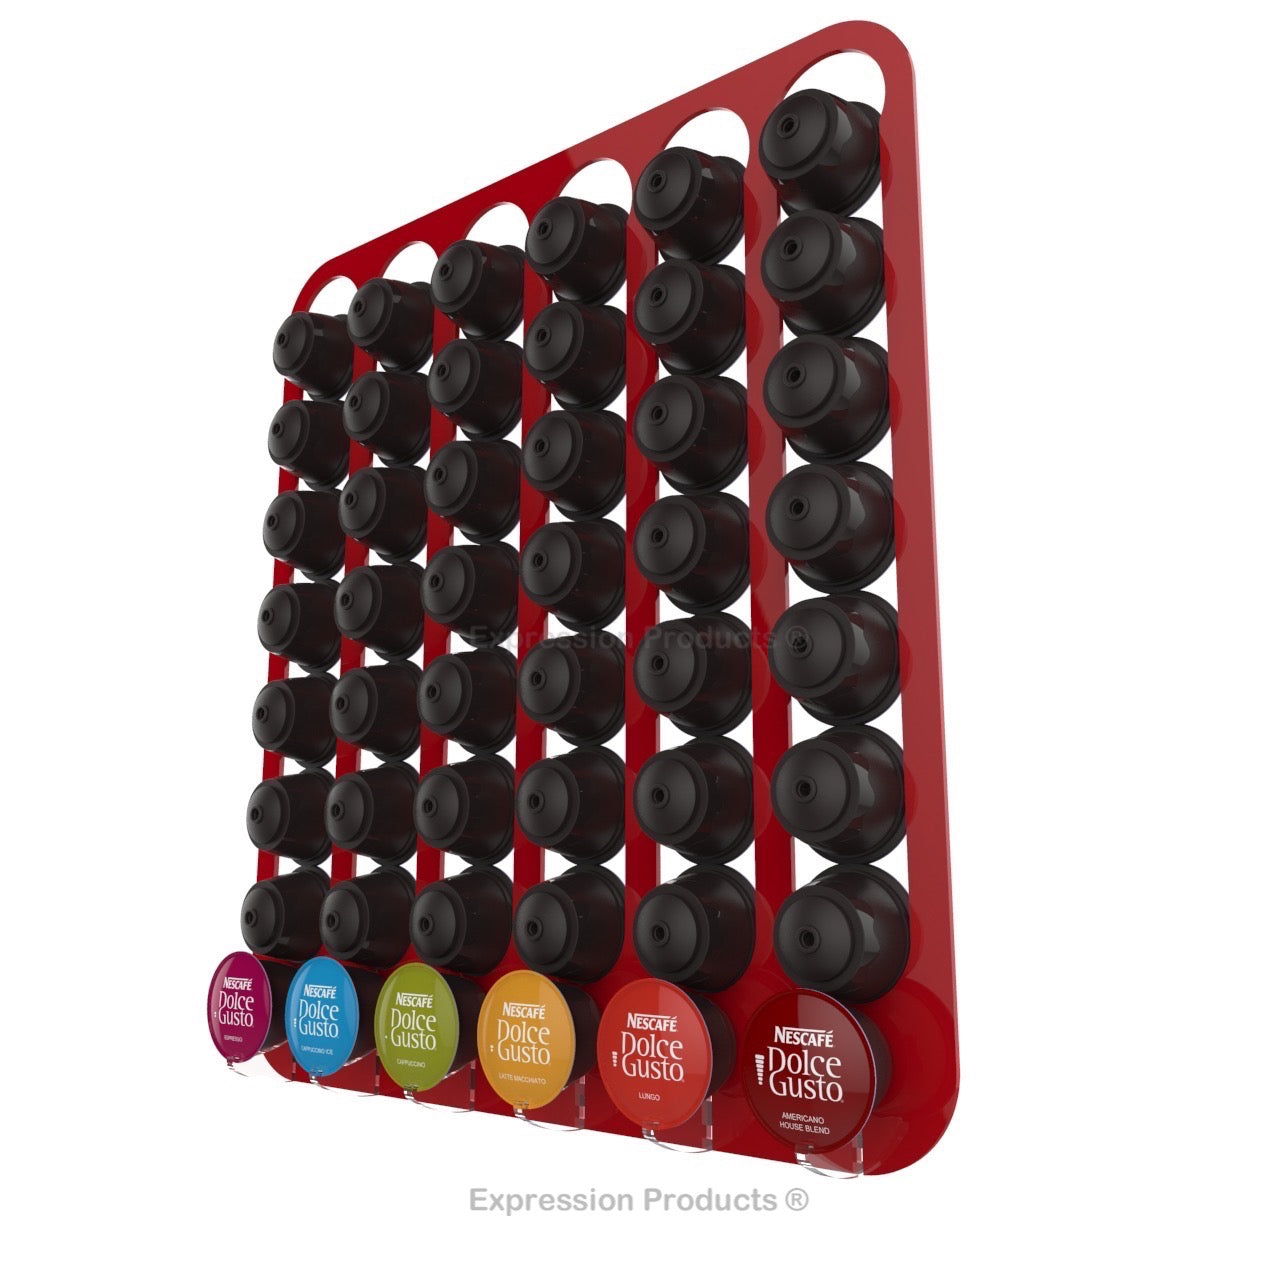 Dolce Gusto Coffee Pod Holder, Wall Mounted.  Shown in Red Holding 48 Pods